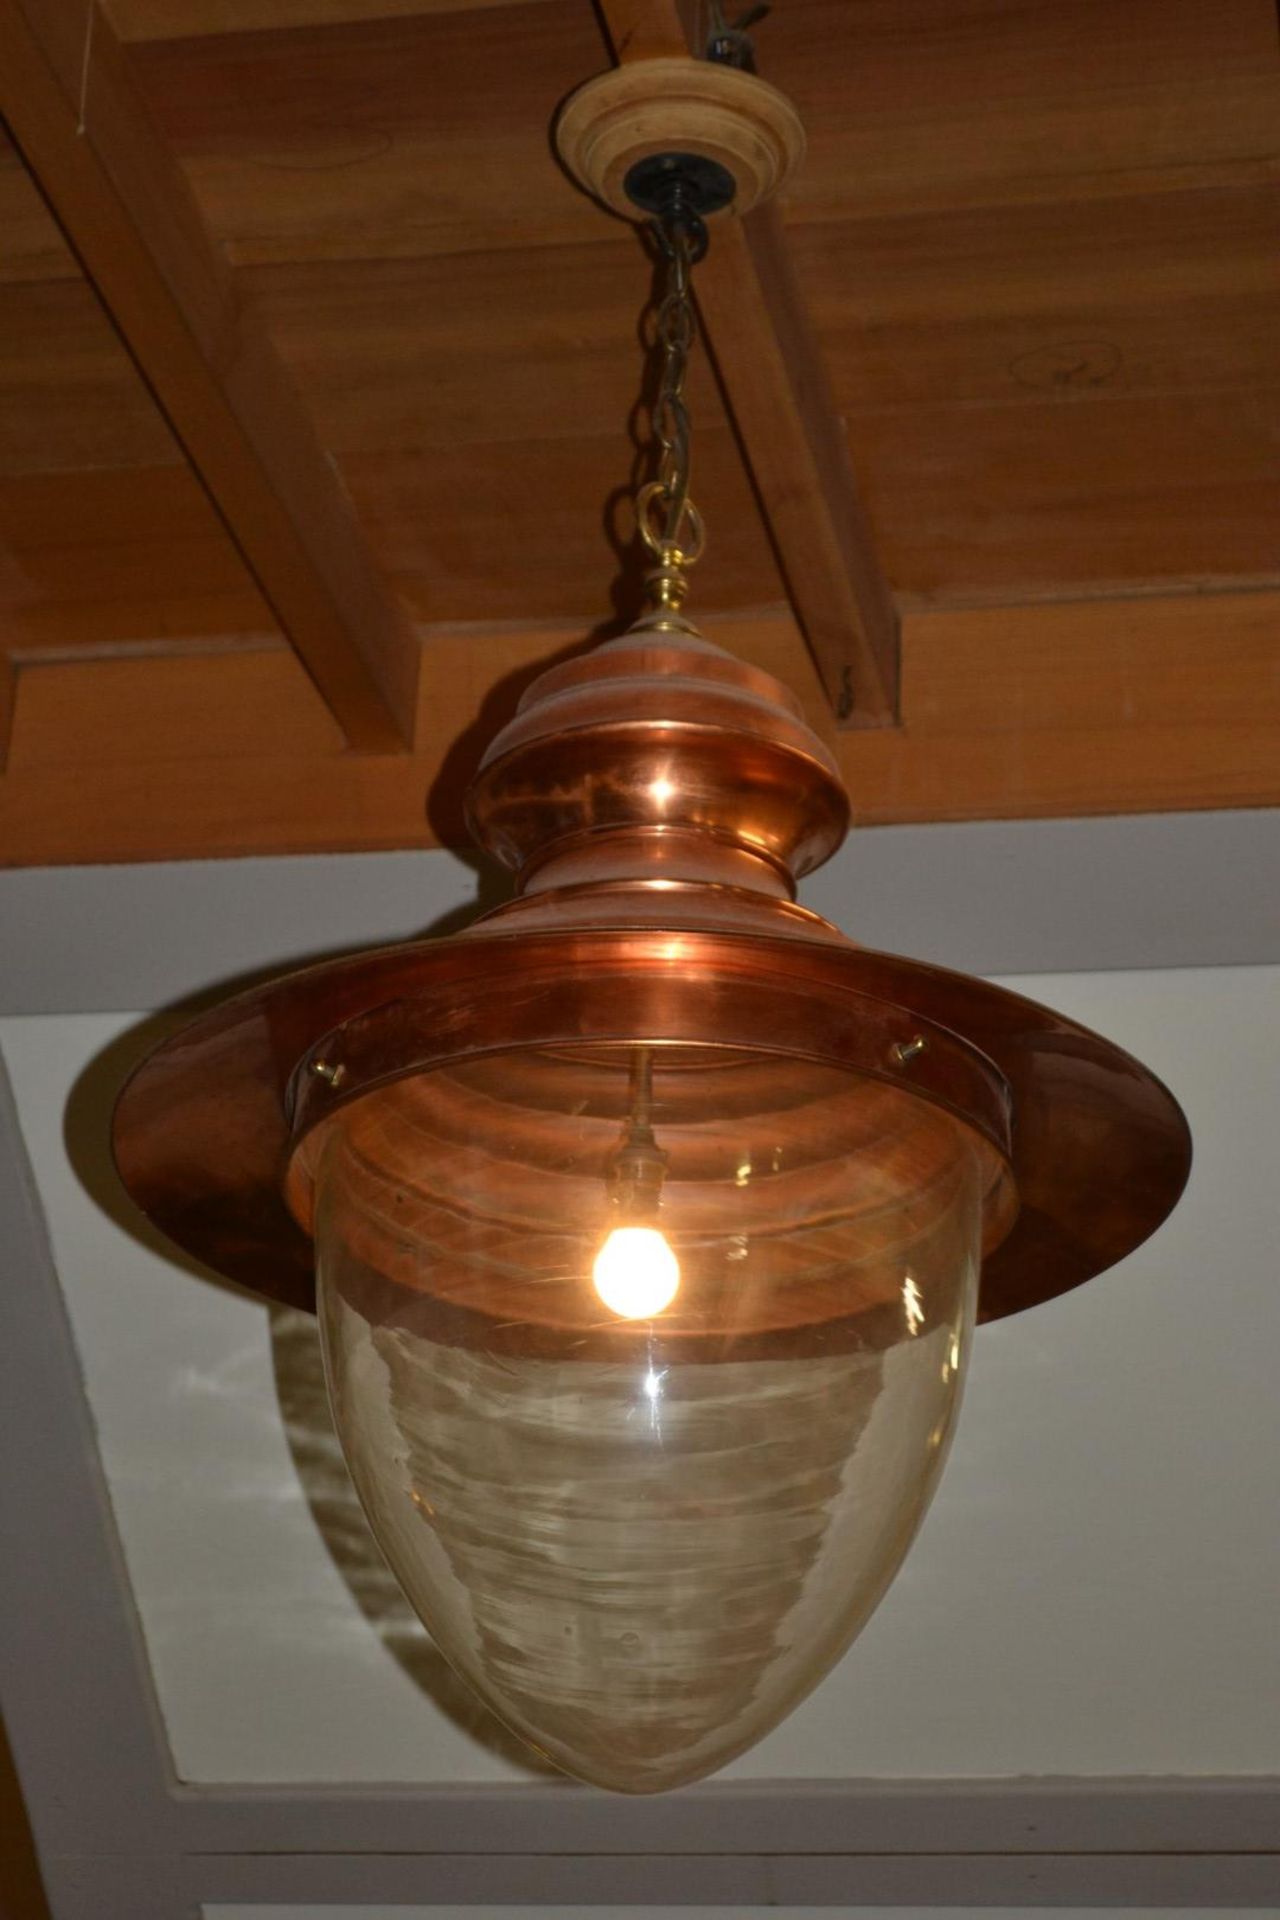 1 x Large Copper Fisherman Pendant Light Fitting - Size Drop 106 x Width 60 cms - Ref BB617 1855 - - Image 3 of 4